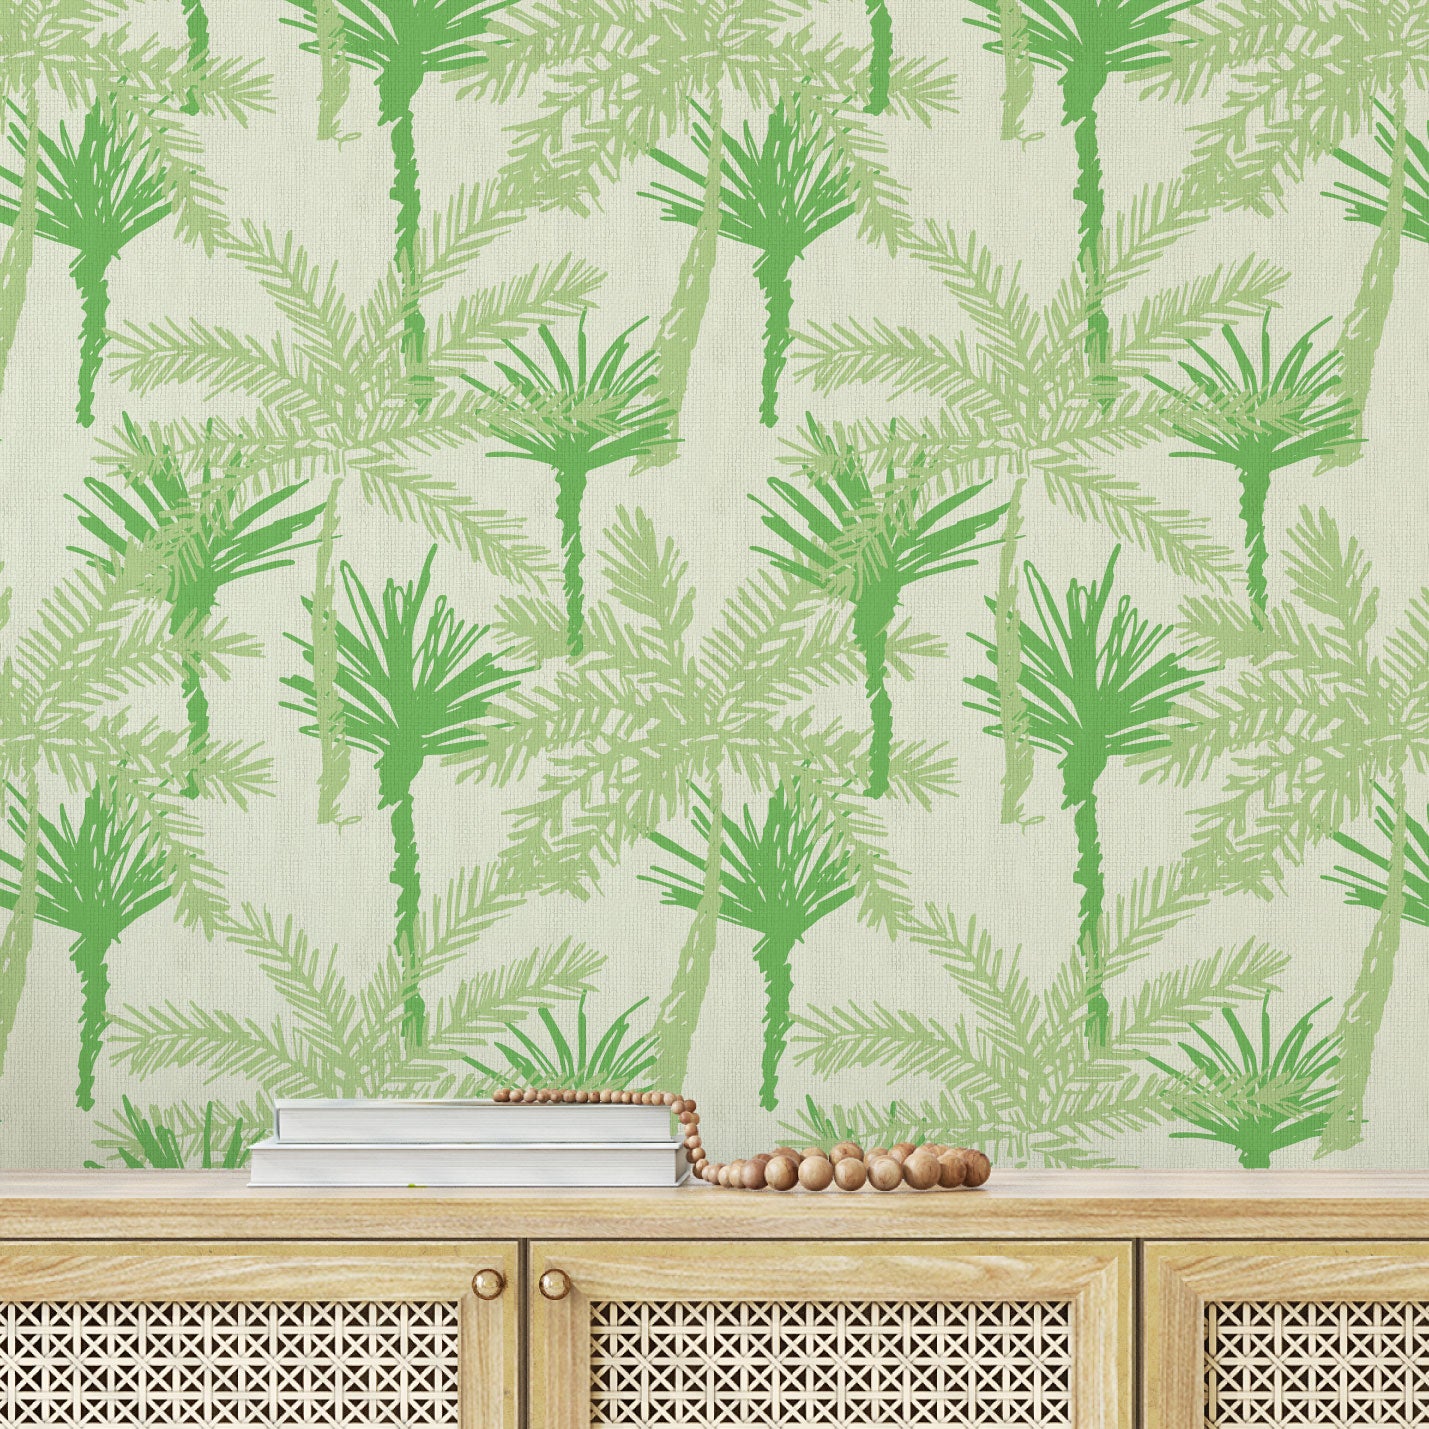 wallpaper Natural Textured Eco-Friendly Non-toxic High-quality Sustainable Interior Design Bold Custom Tailor-made Retro chic Tropical Jungle Coastal Garden Seaside Coastal Seashore Waterfront Vacation home styling Retreat Relaxed beach vibes Beach cottage Shoreline Oceanfront nature palm tree palms tonal cream off-white beige green jungle mint sage paperweave paper weave dresser console